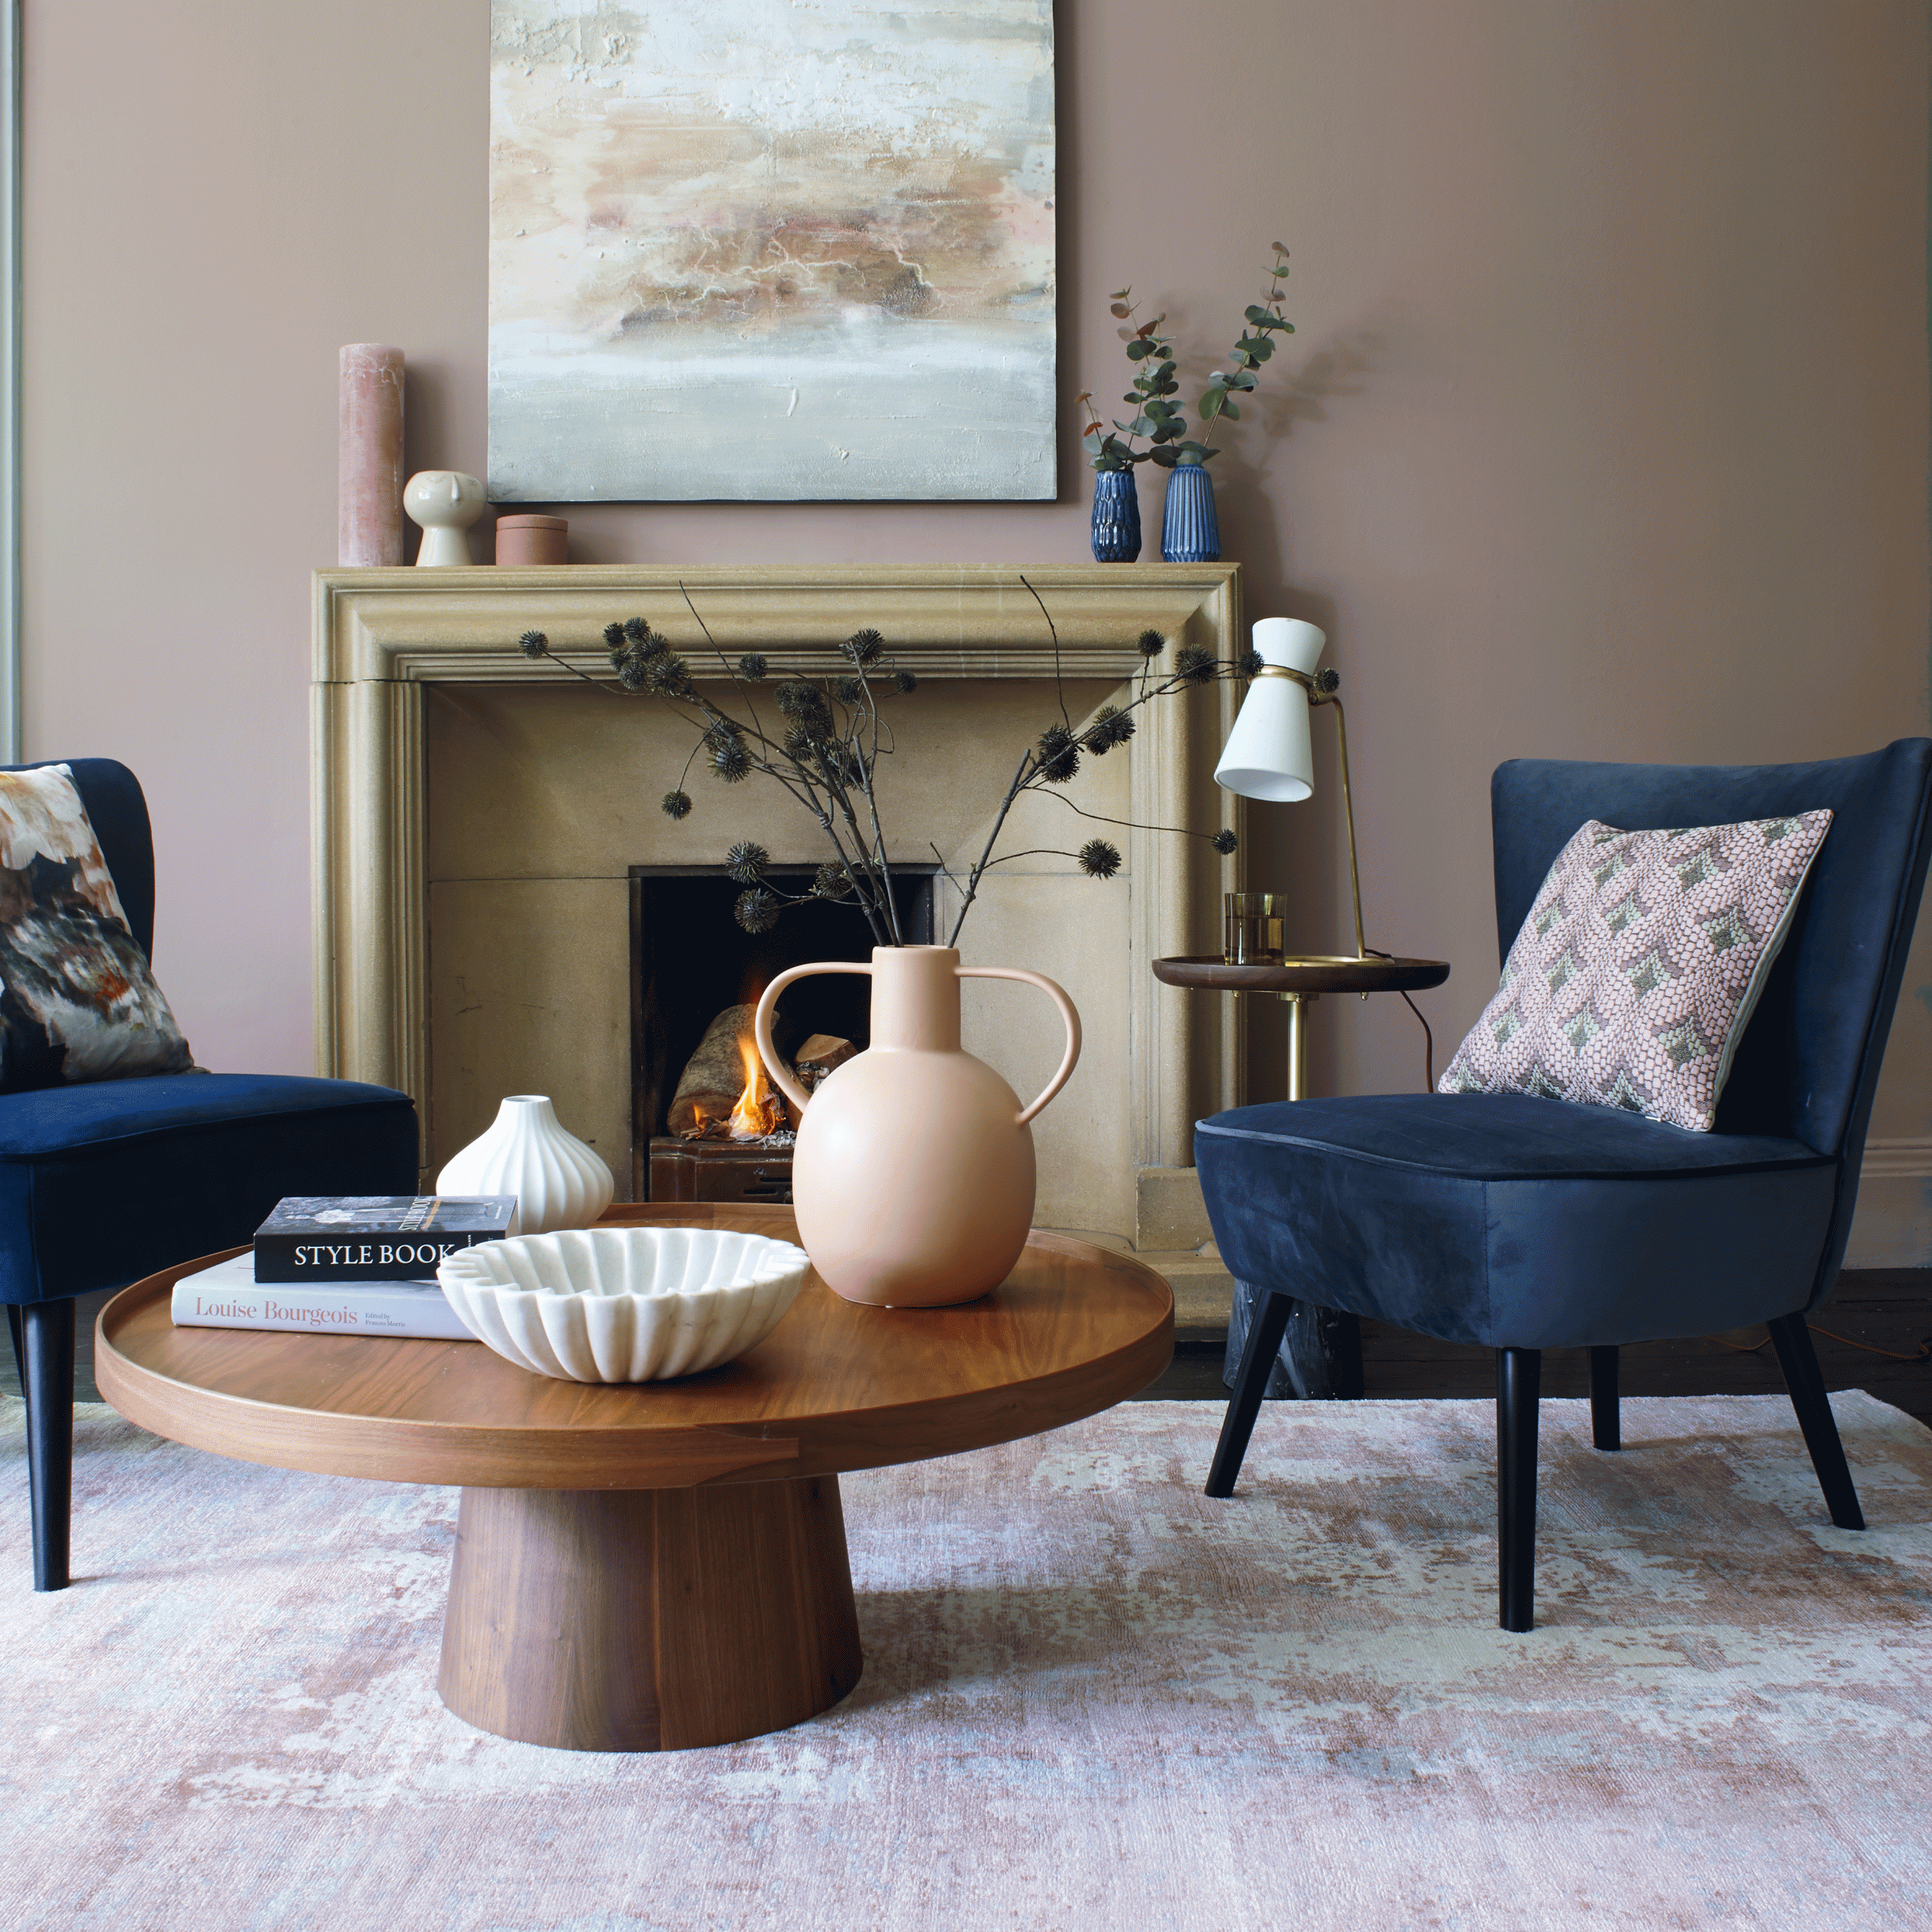 A natural wood coffee table with two blue upholstered chairs positioned in front of a lit fireplace.